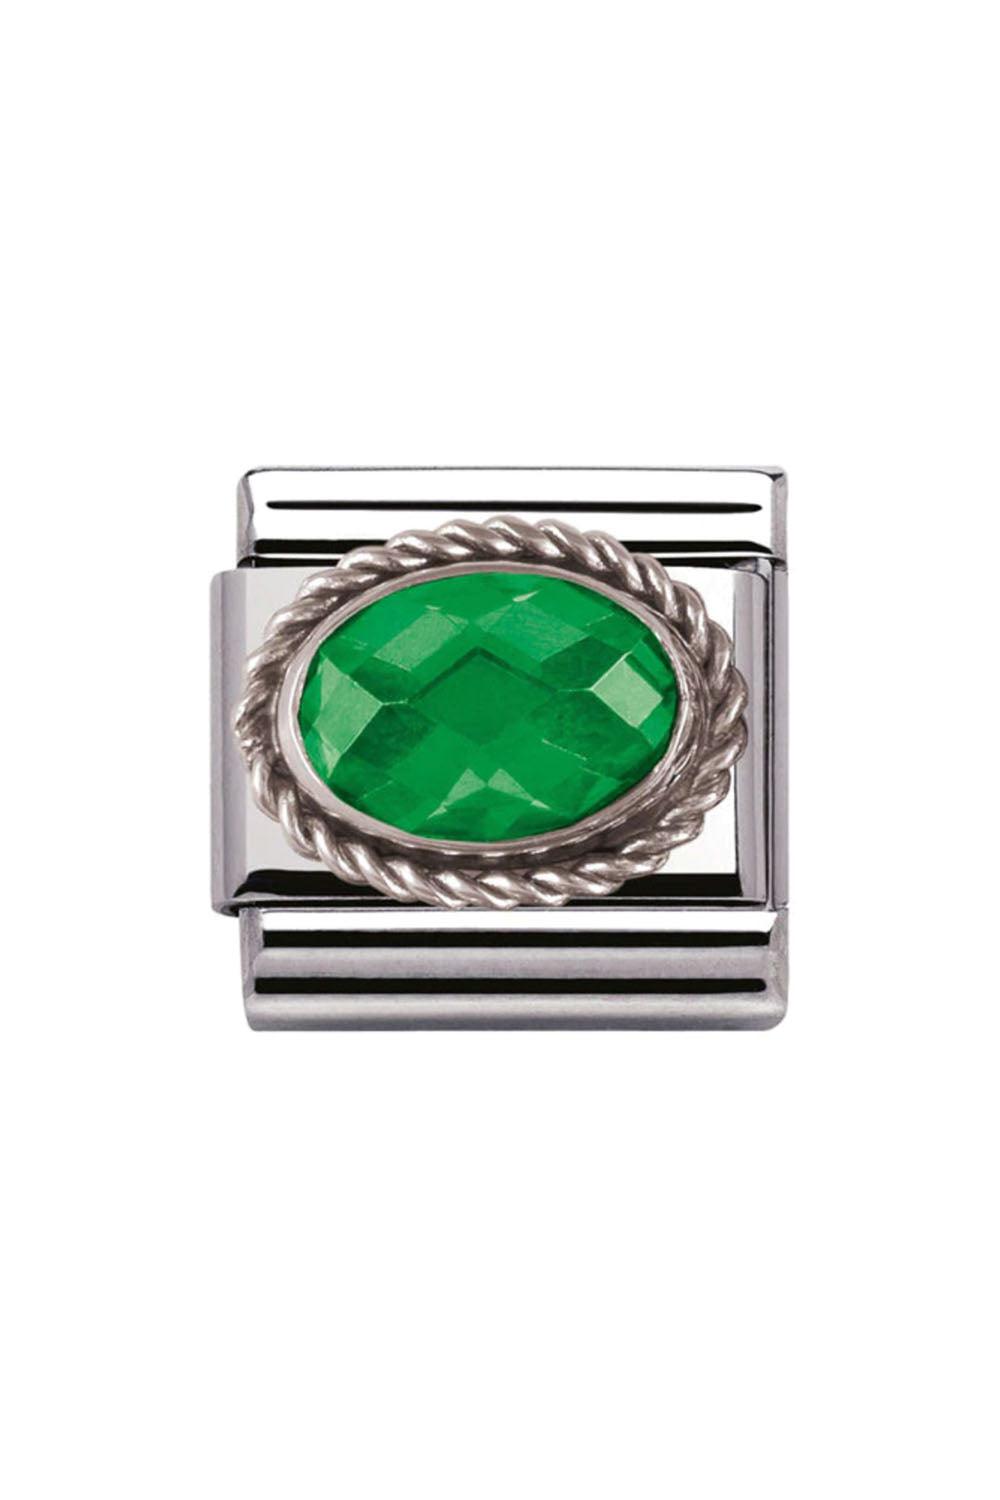 CZ faceted with 925 sterling silver setting and CZ Green